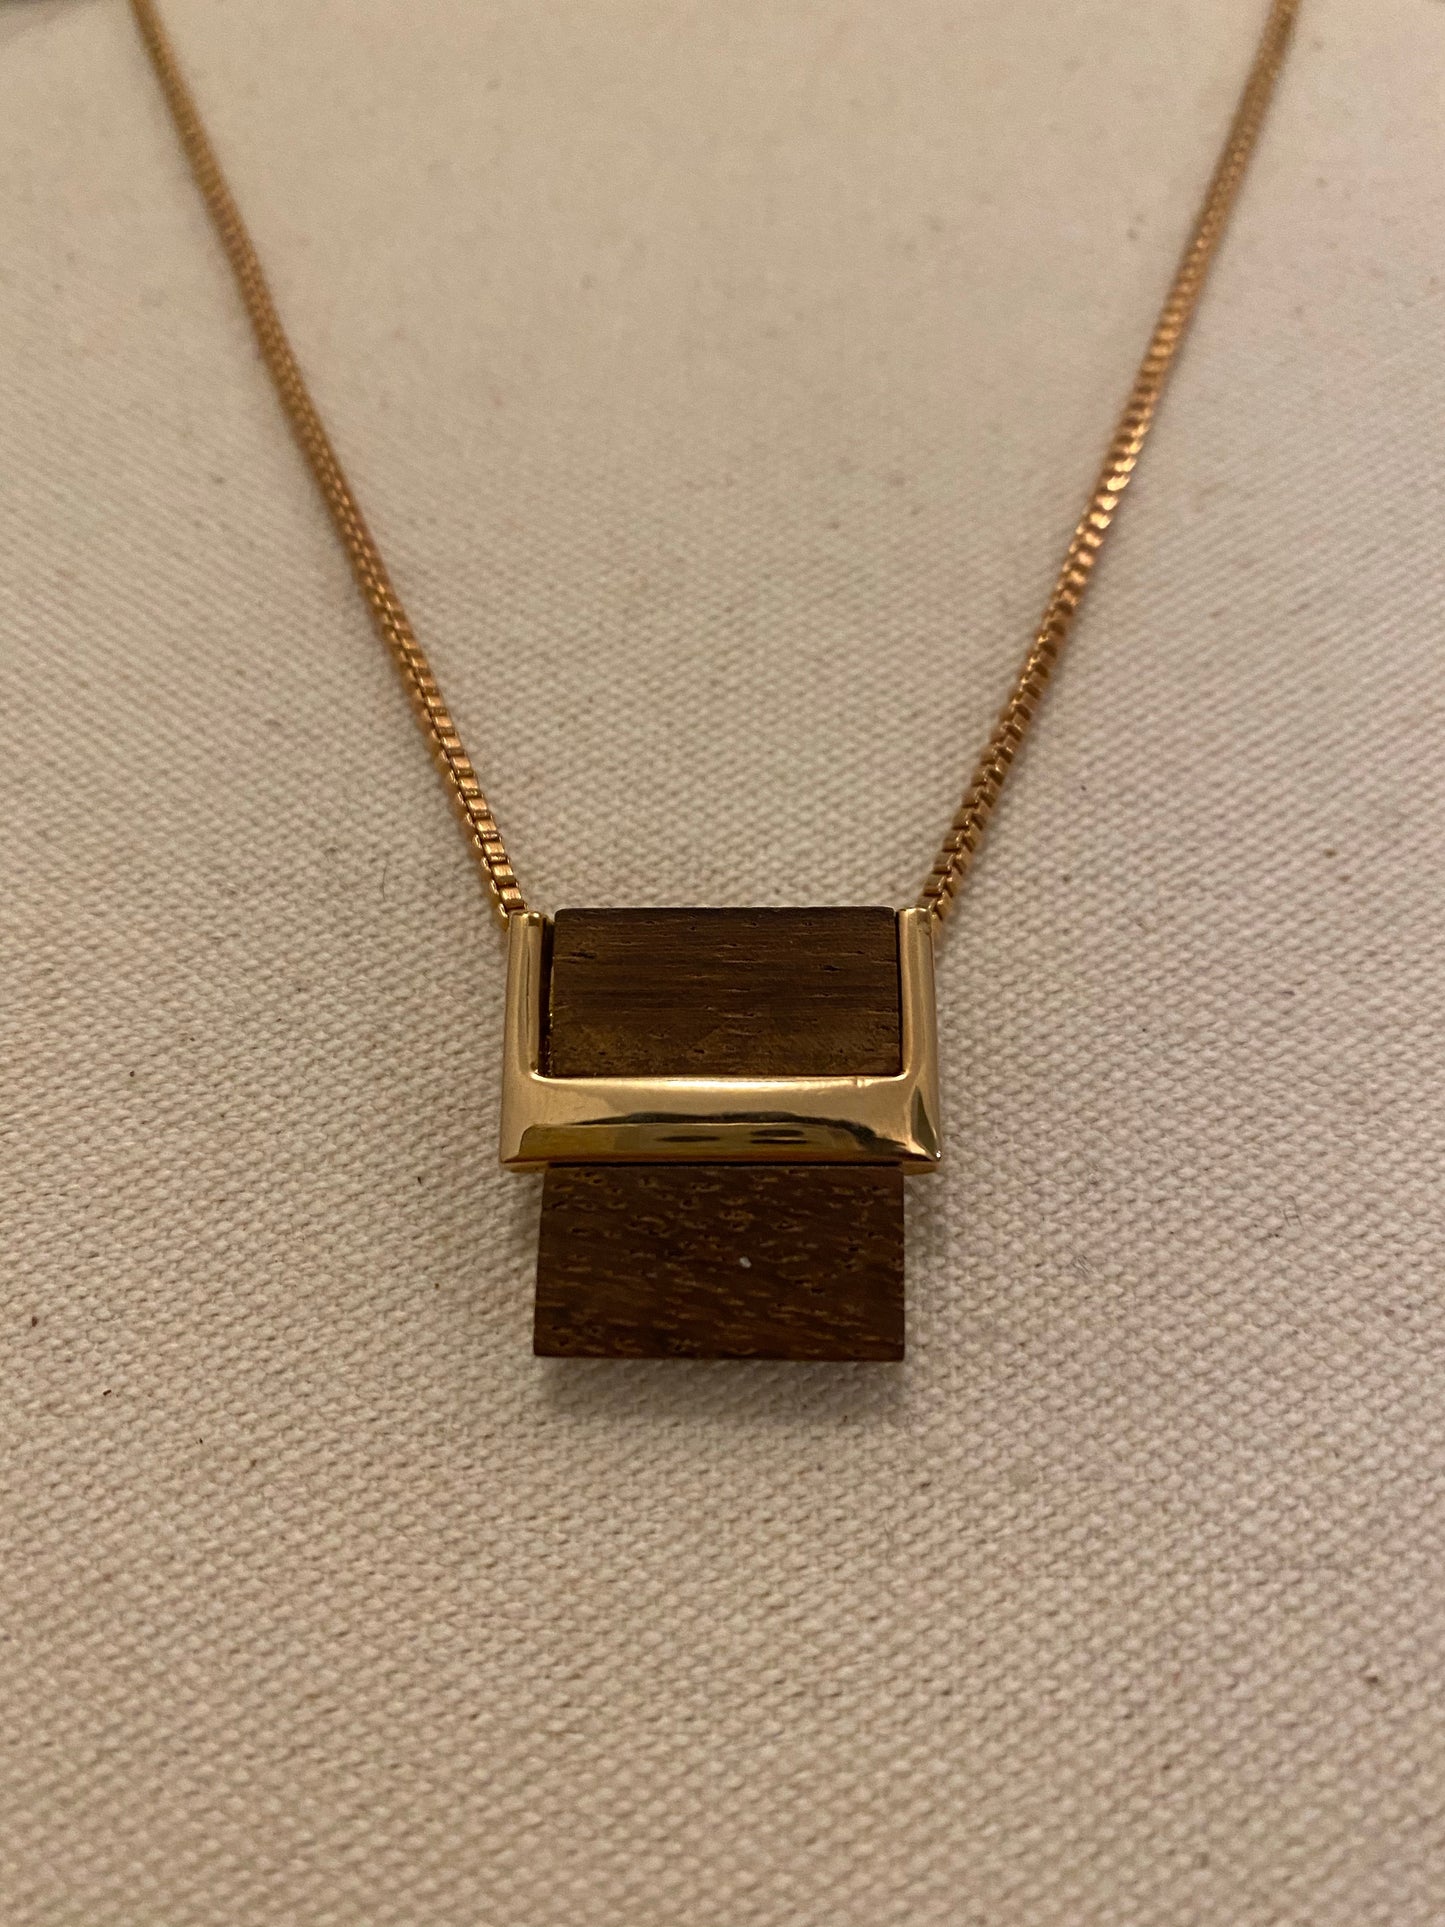 Rose gold and wood necklace, 1970’s